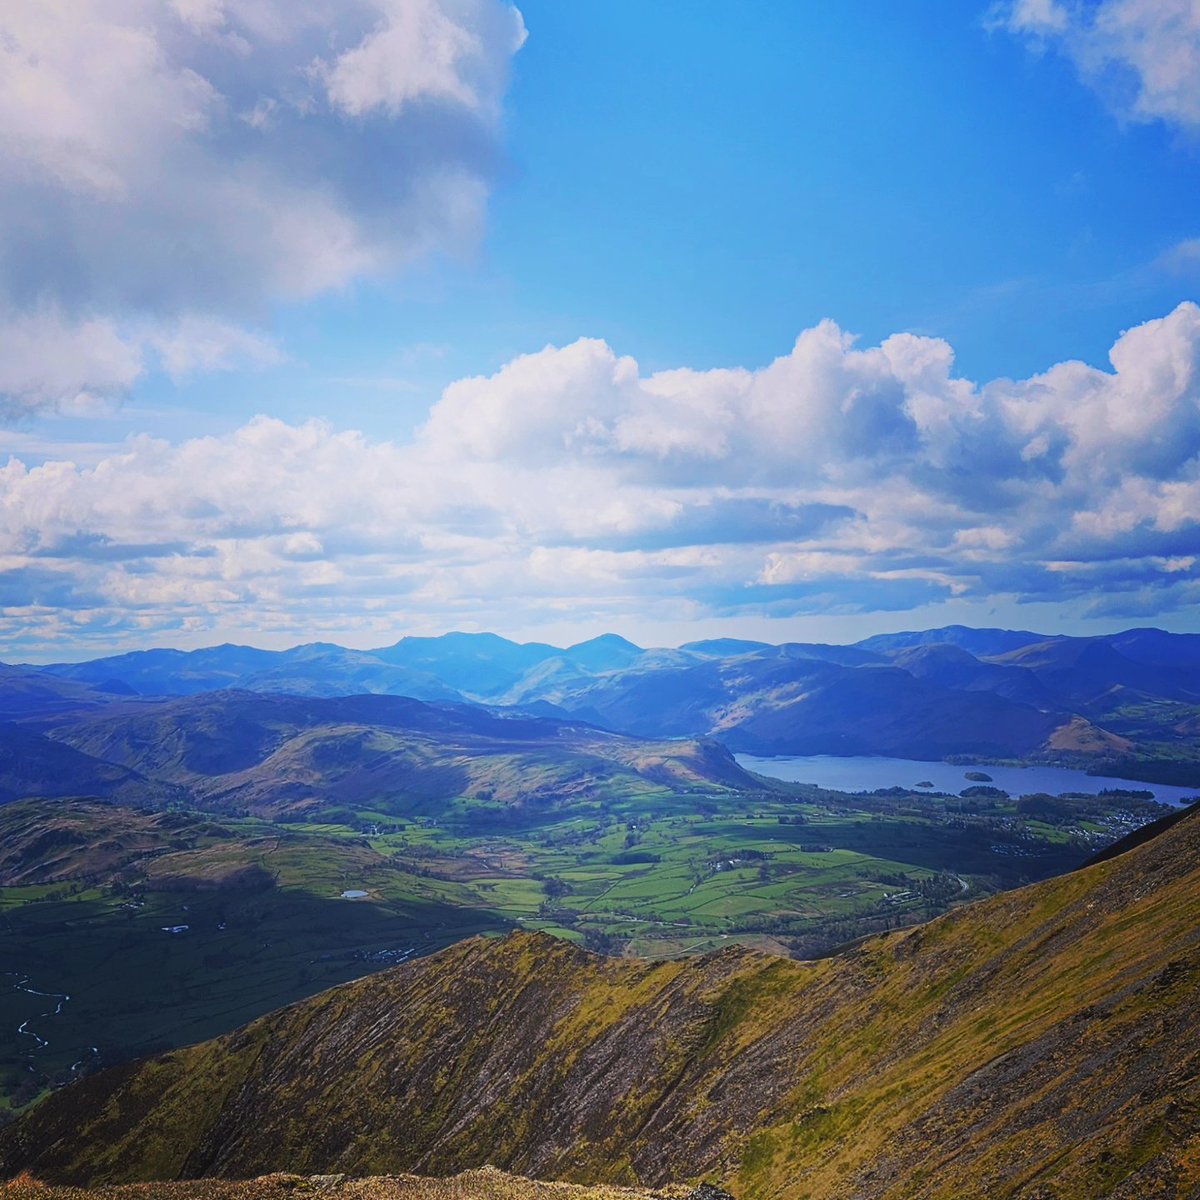 Headed up Blencathra yesterday & was rewarded with this view. No better medicine 😍